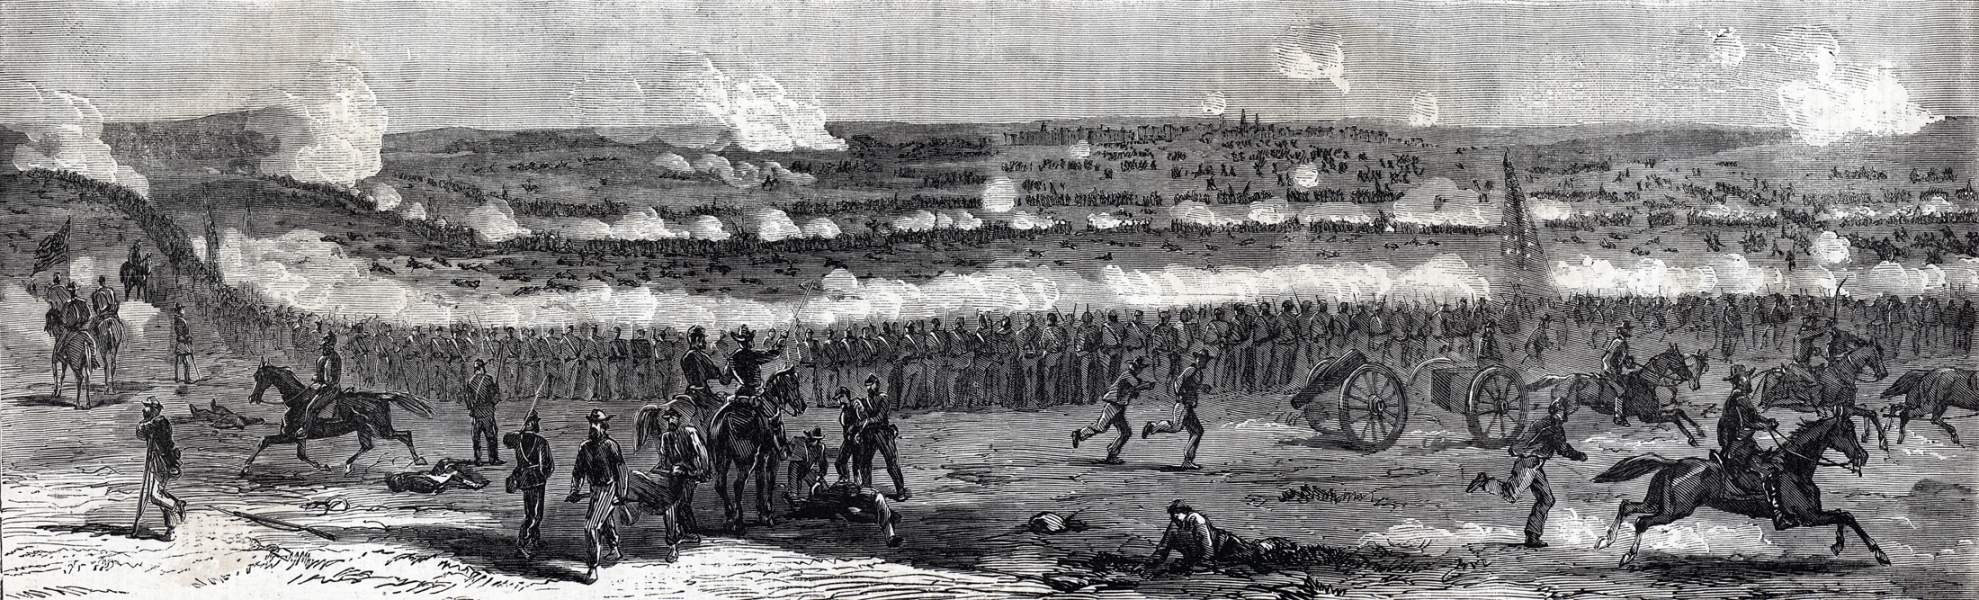 Confederate forces falling back at Third Battle of Winchester, Virginia, September 19, 1864, artist's impression, zoomable image